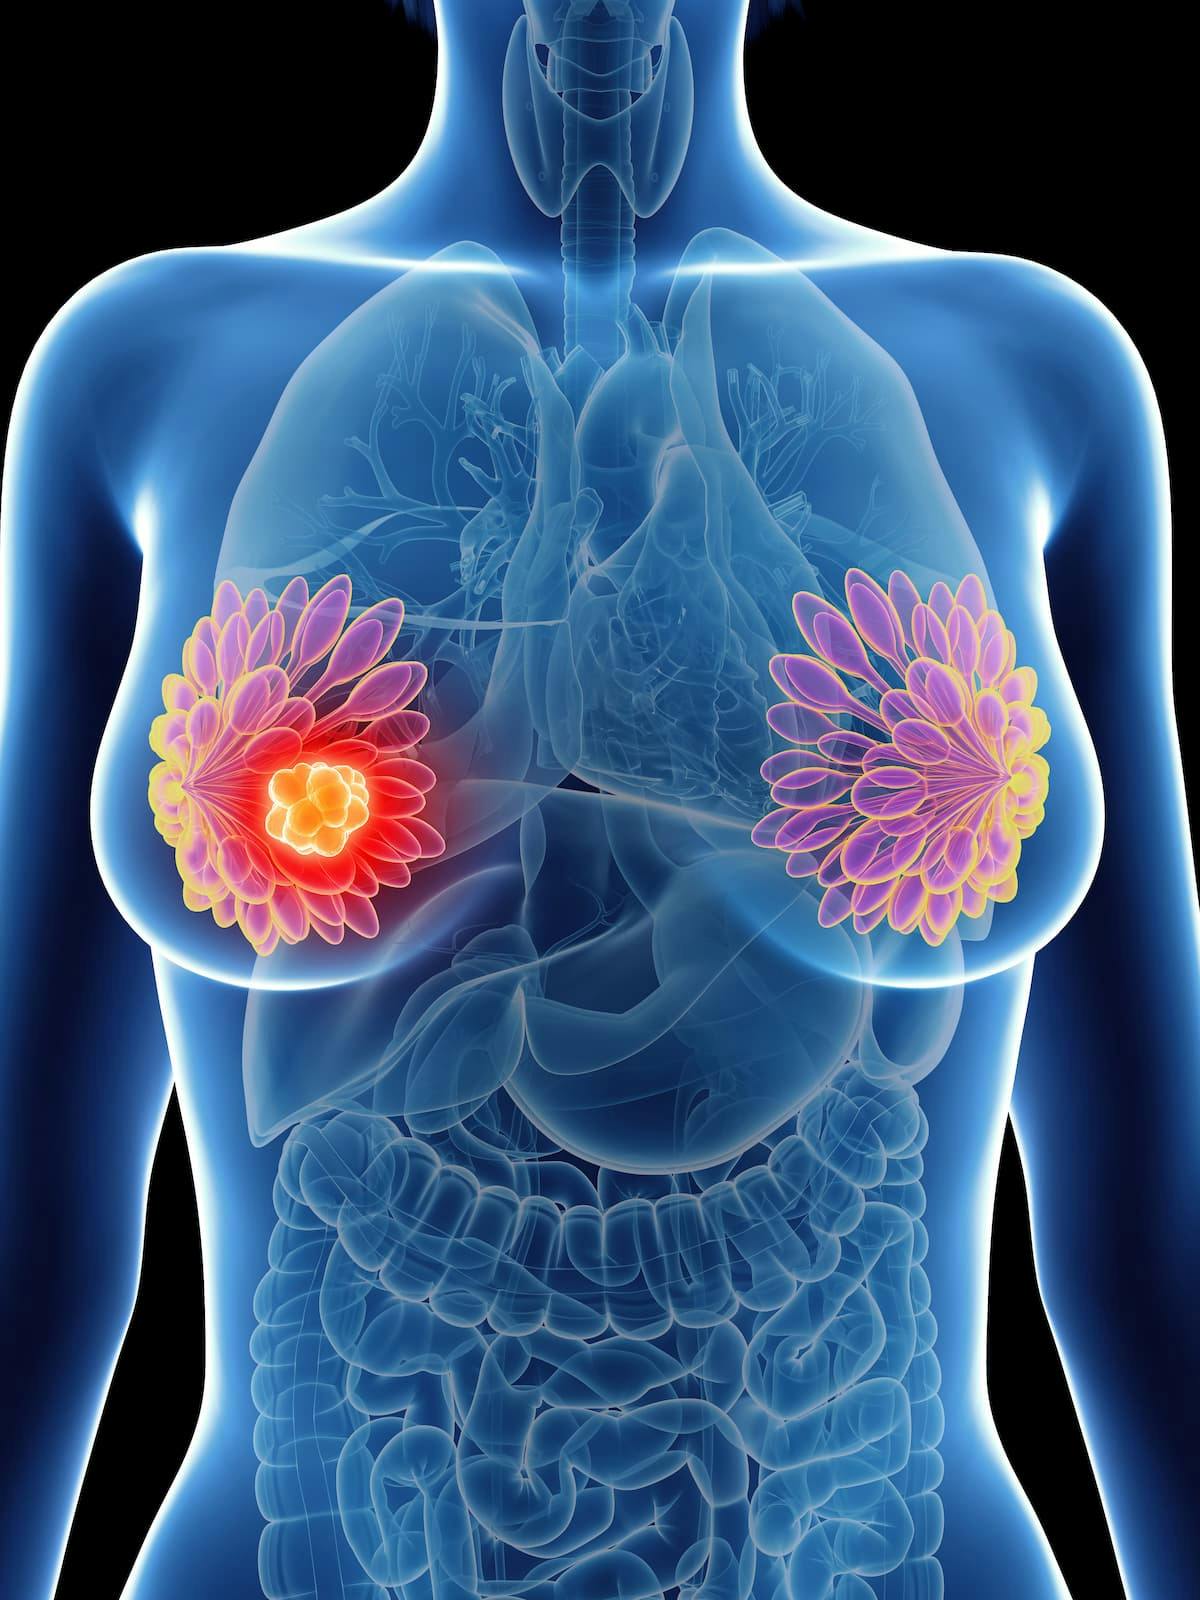 An improved efficacy response resulted from the use of patritumab deruxtecan to treat patients who had been heavily pretreated for metastatic breast cancer. 